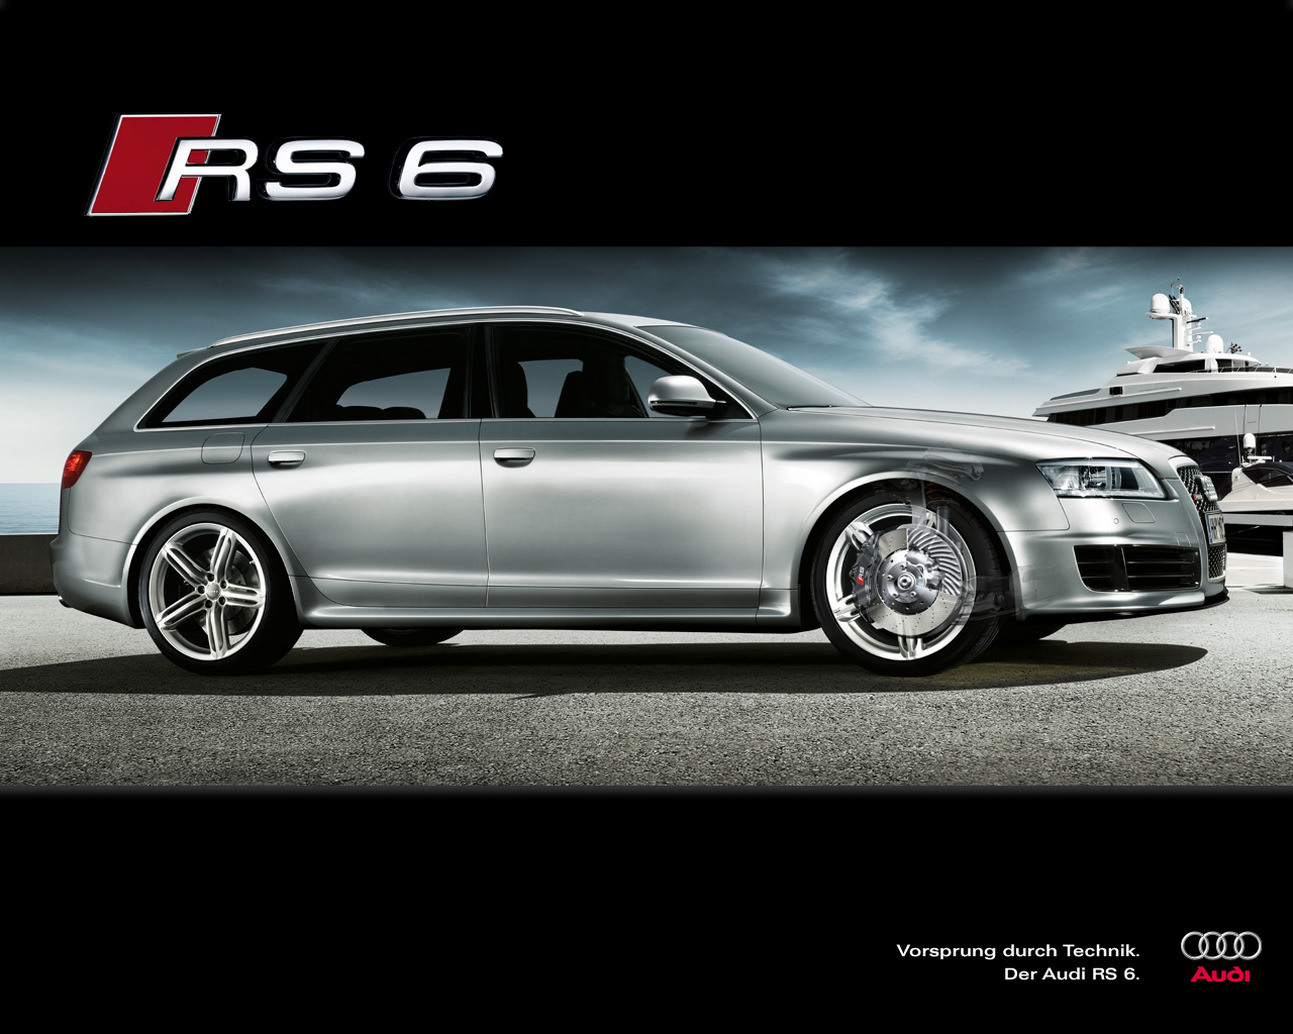 Audi Price on Audi Rs6   Articles  Features  Gallery  Photos  Buy Cars   Go Motors